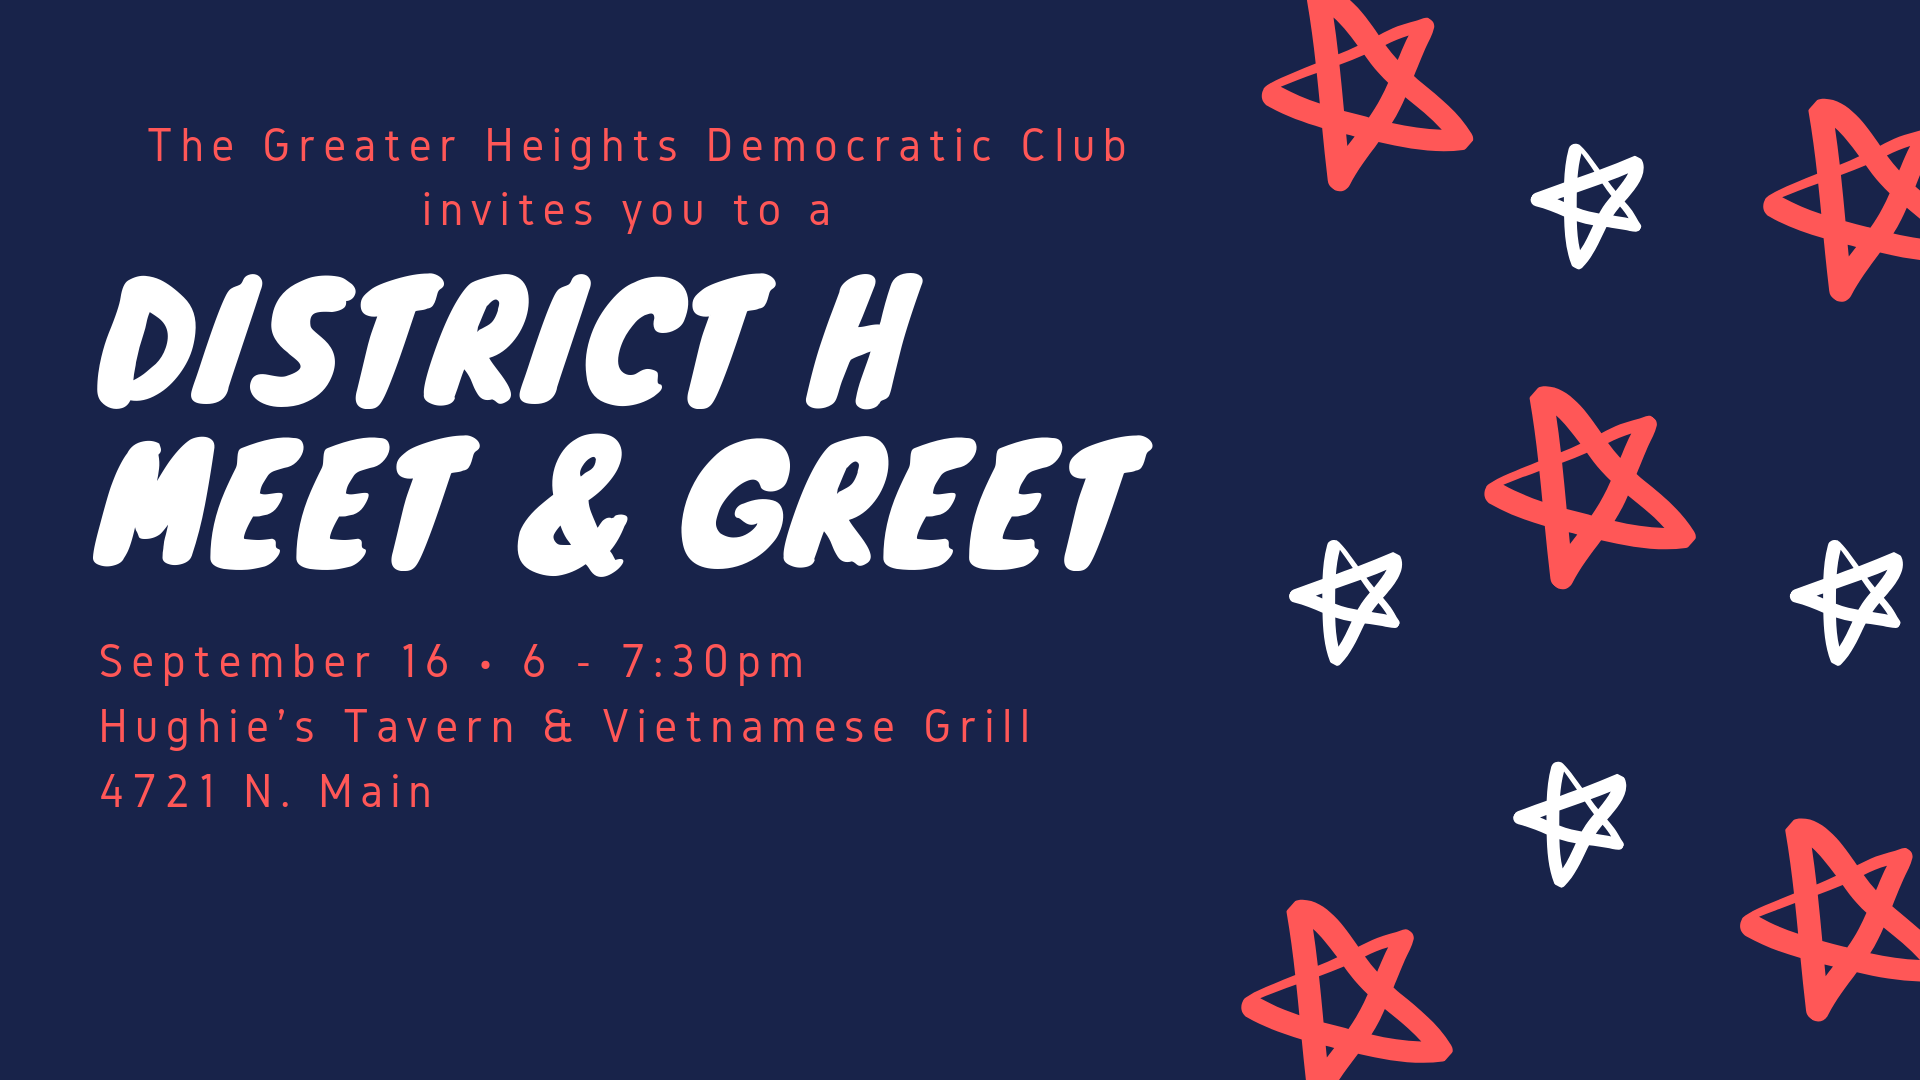 Come out and meet the Democratic candidates for City Council District H!